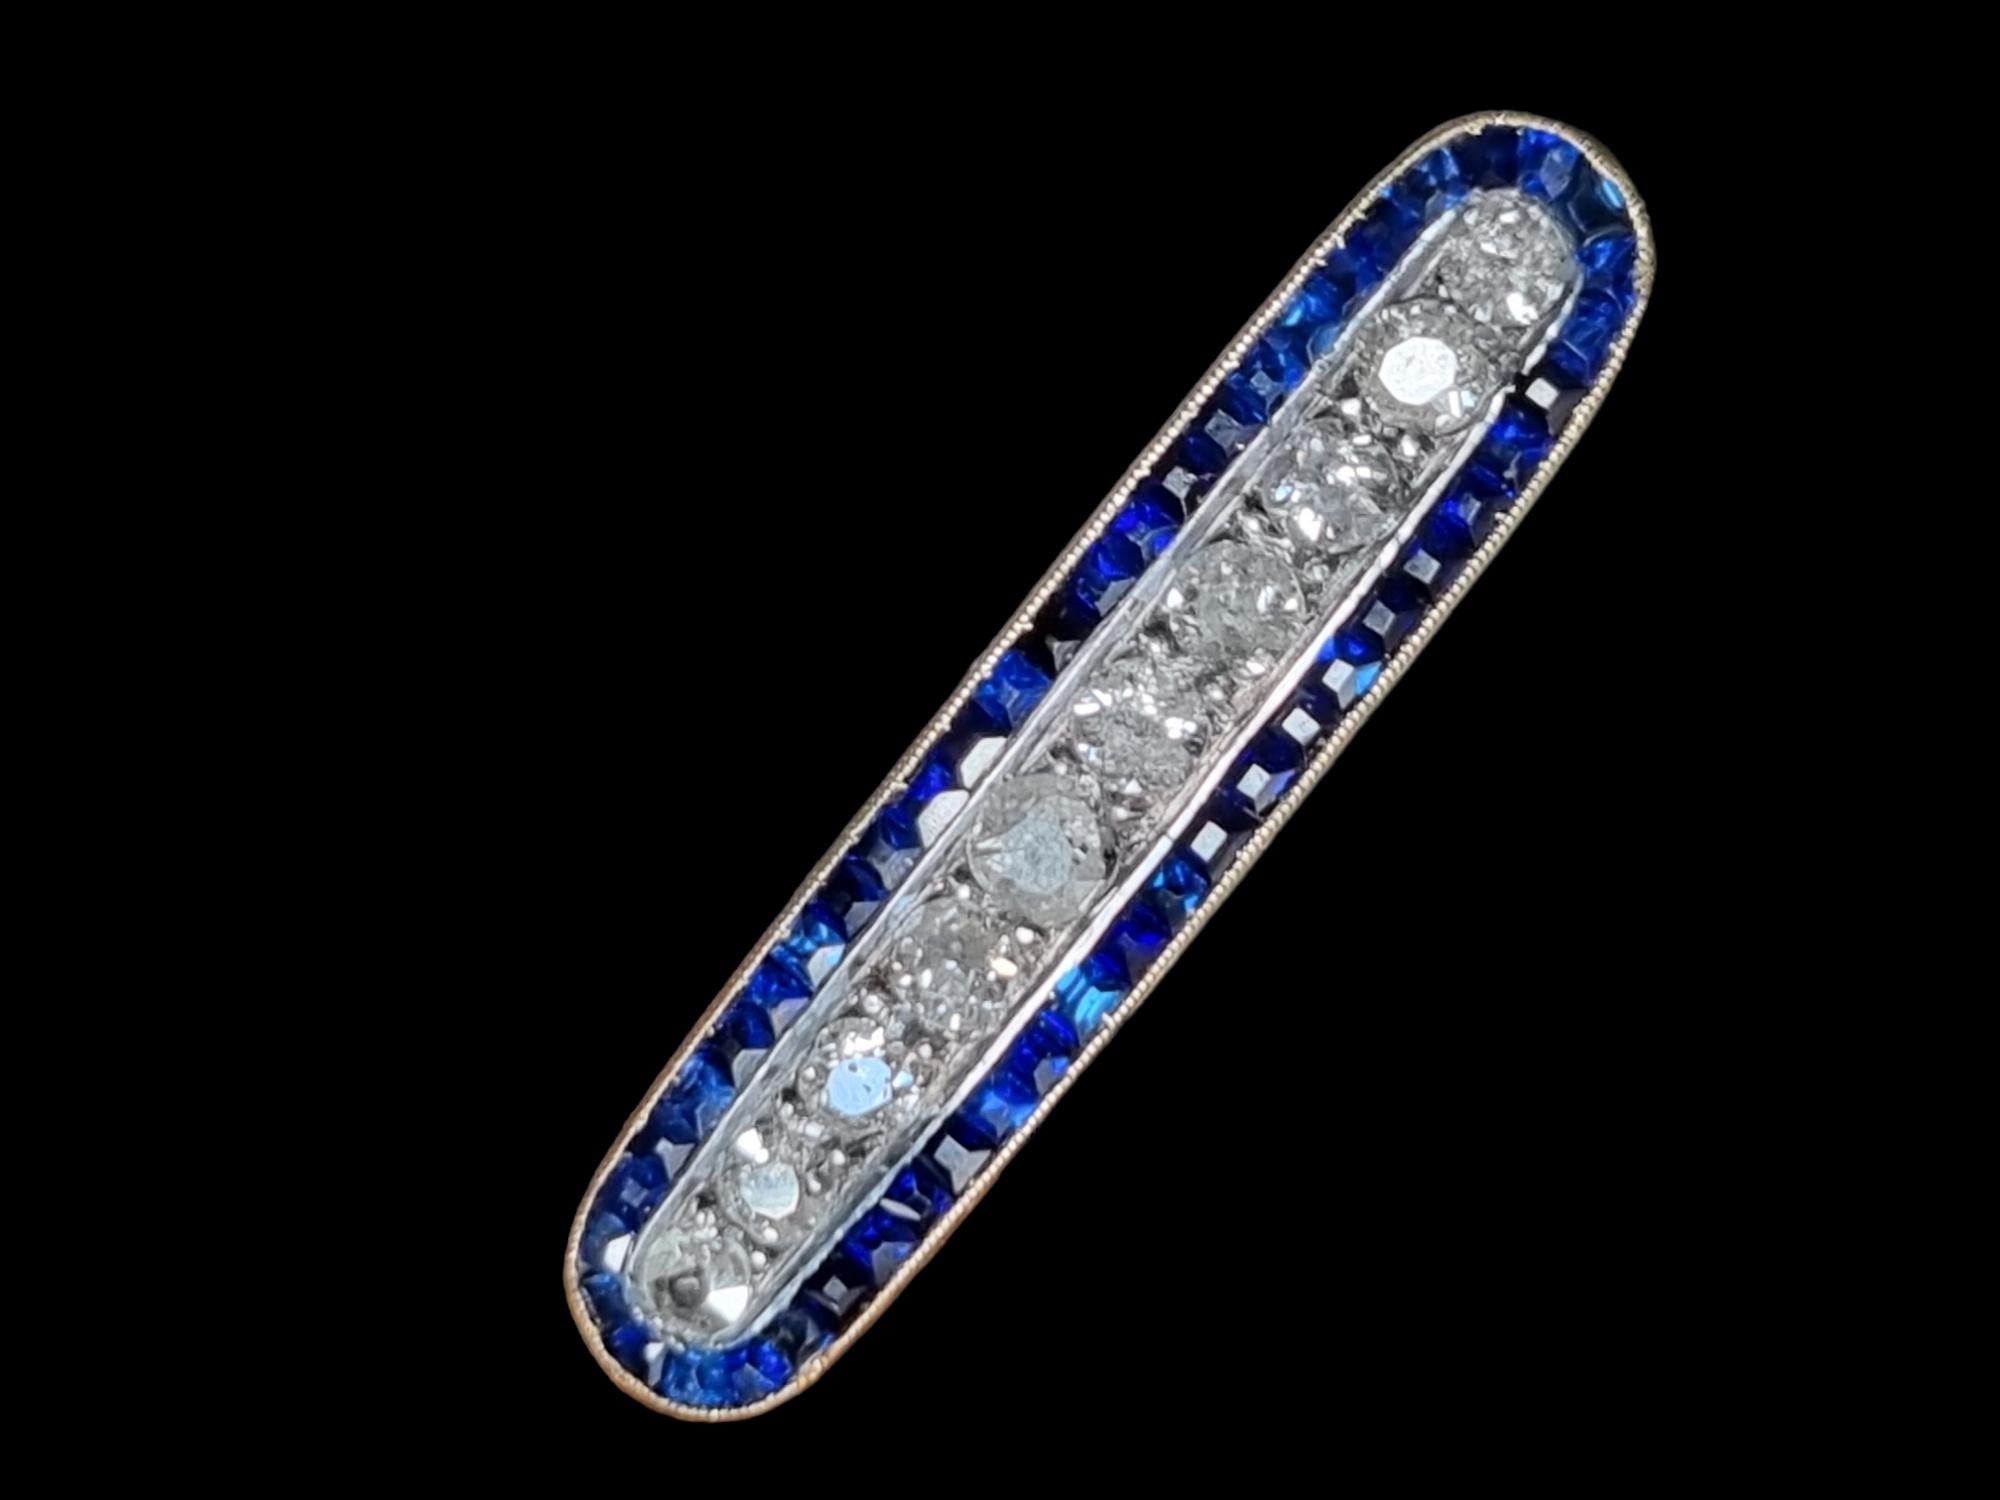 Antique Art Deco Old Cut Diamond and  Blue Sapphire Bar Brooch (Ca. 1915-1920)
Hand fabricated in 18Karat Gold (tested). Original Art Deco bar pin, this striking geometric jewel oval shaped, measuring 3.45 cm (USA 1 1/3 inches). Centering ten old